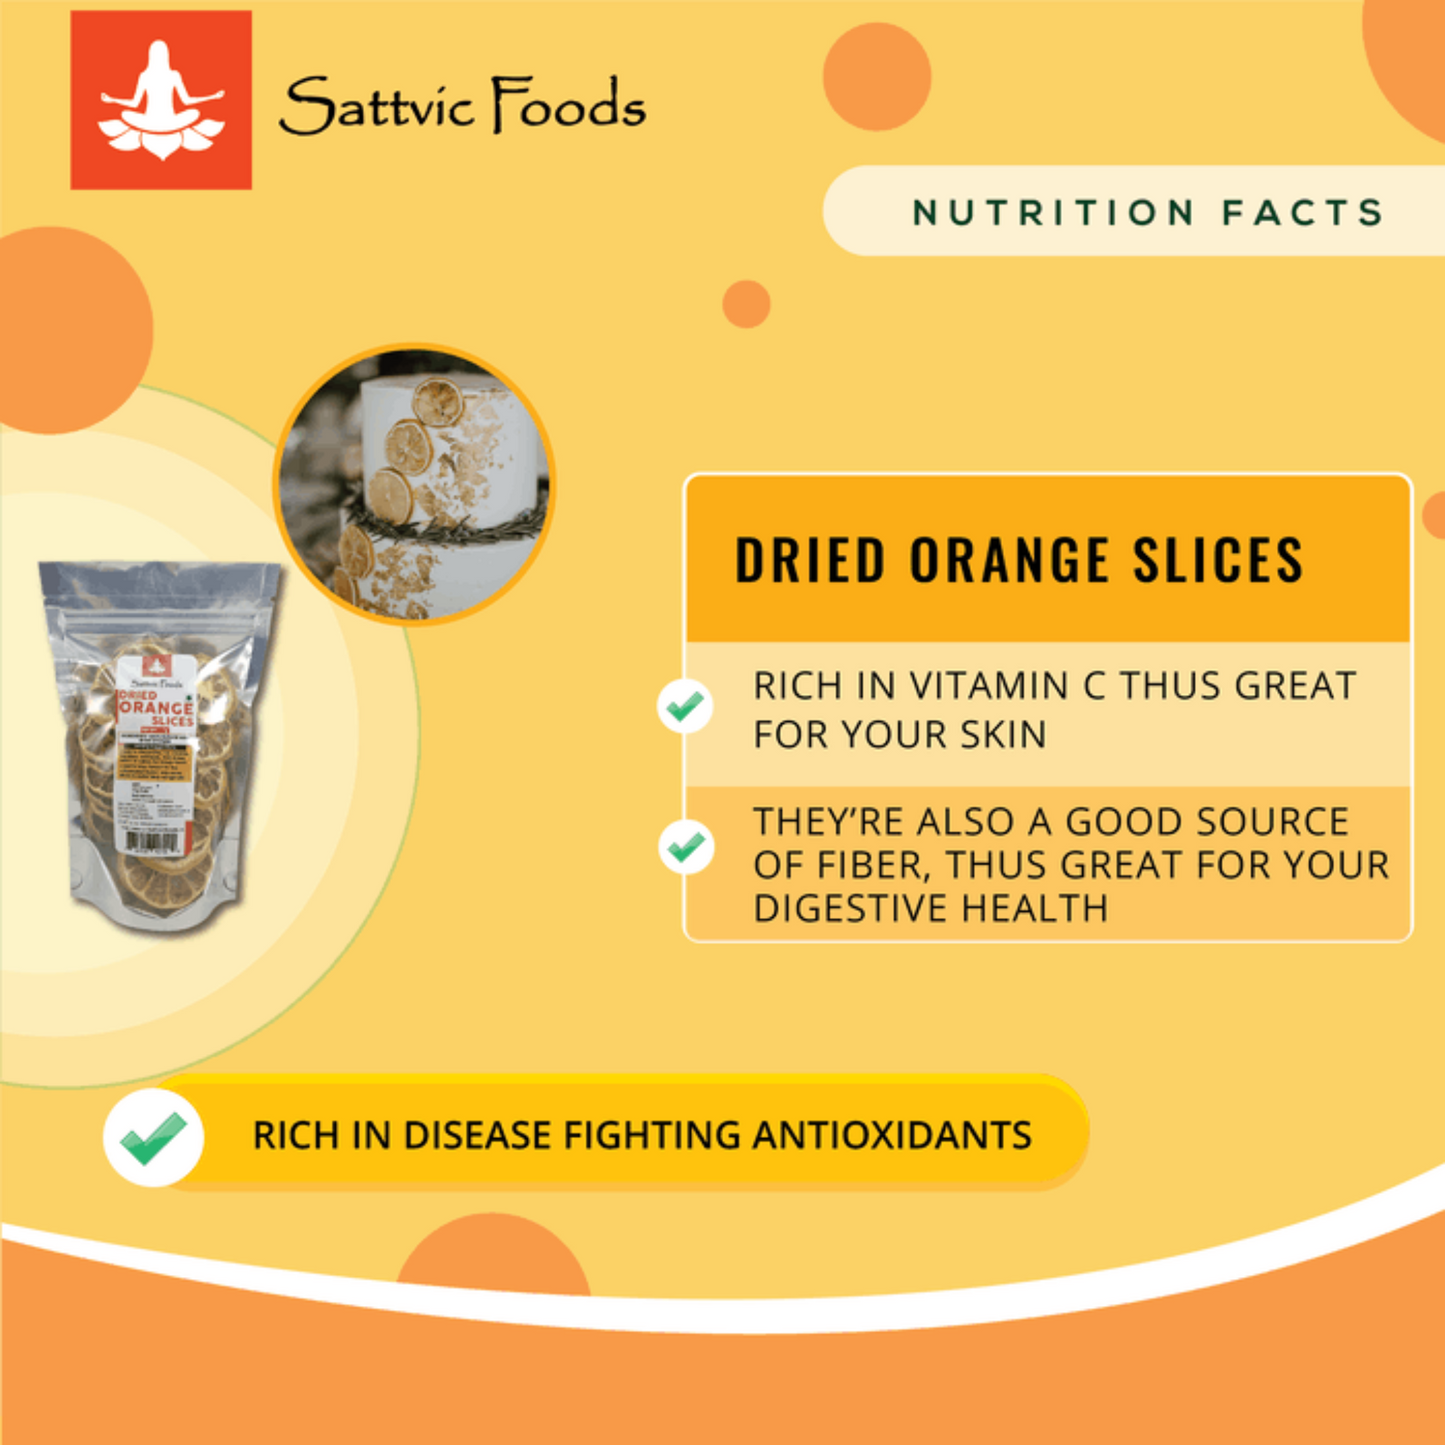 Dried Orange Slices - Nutrition facts